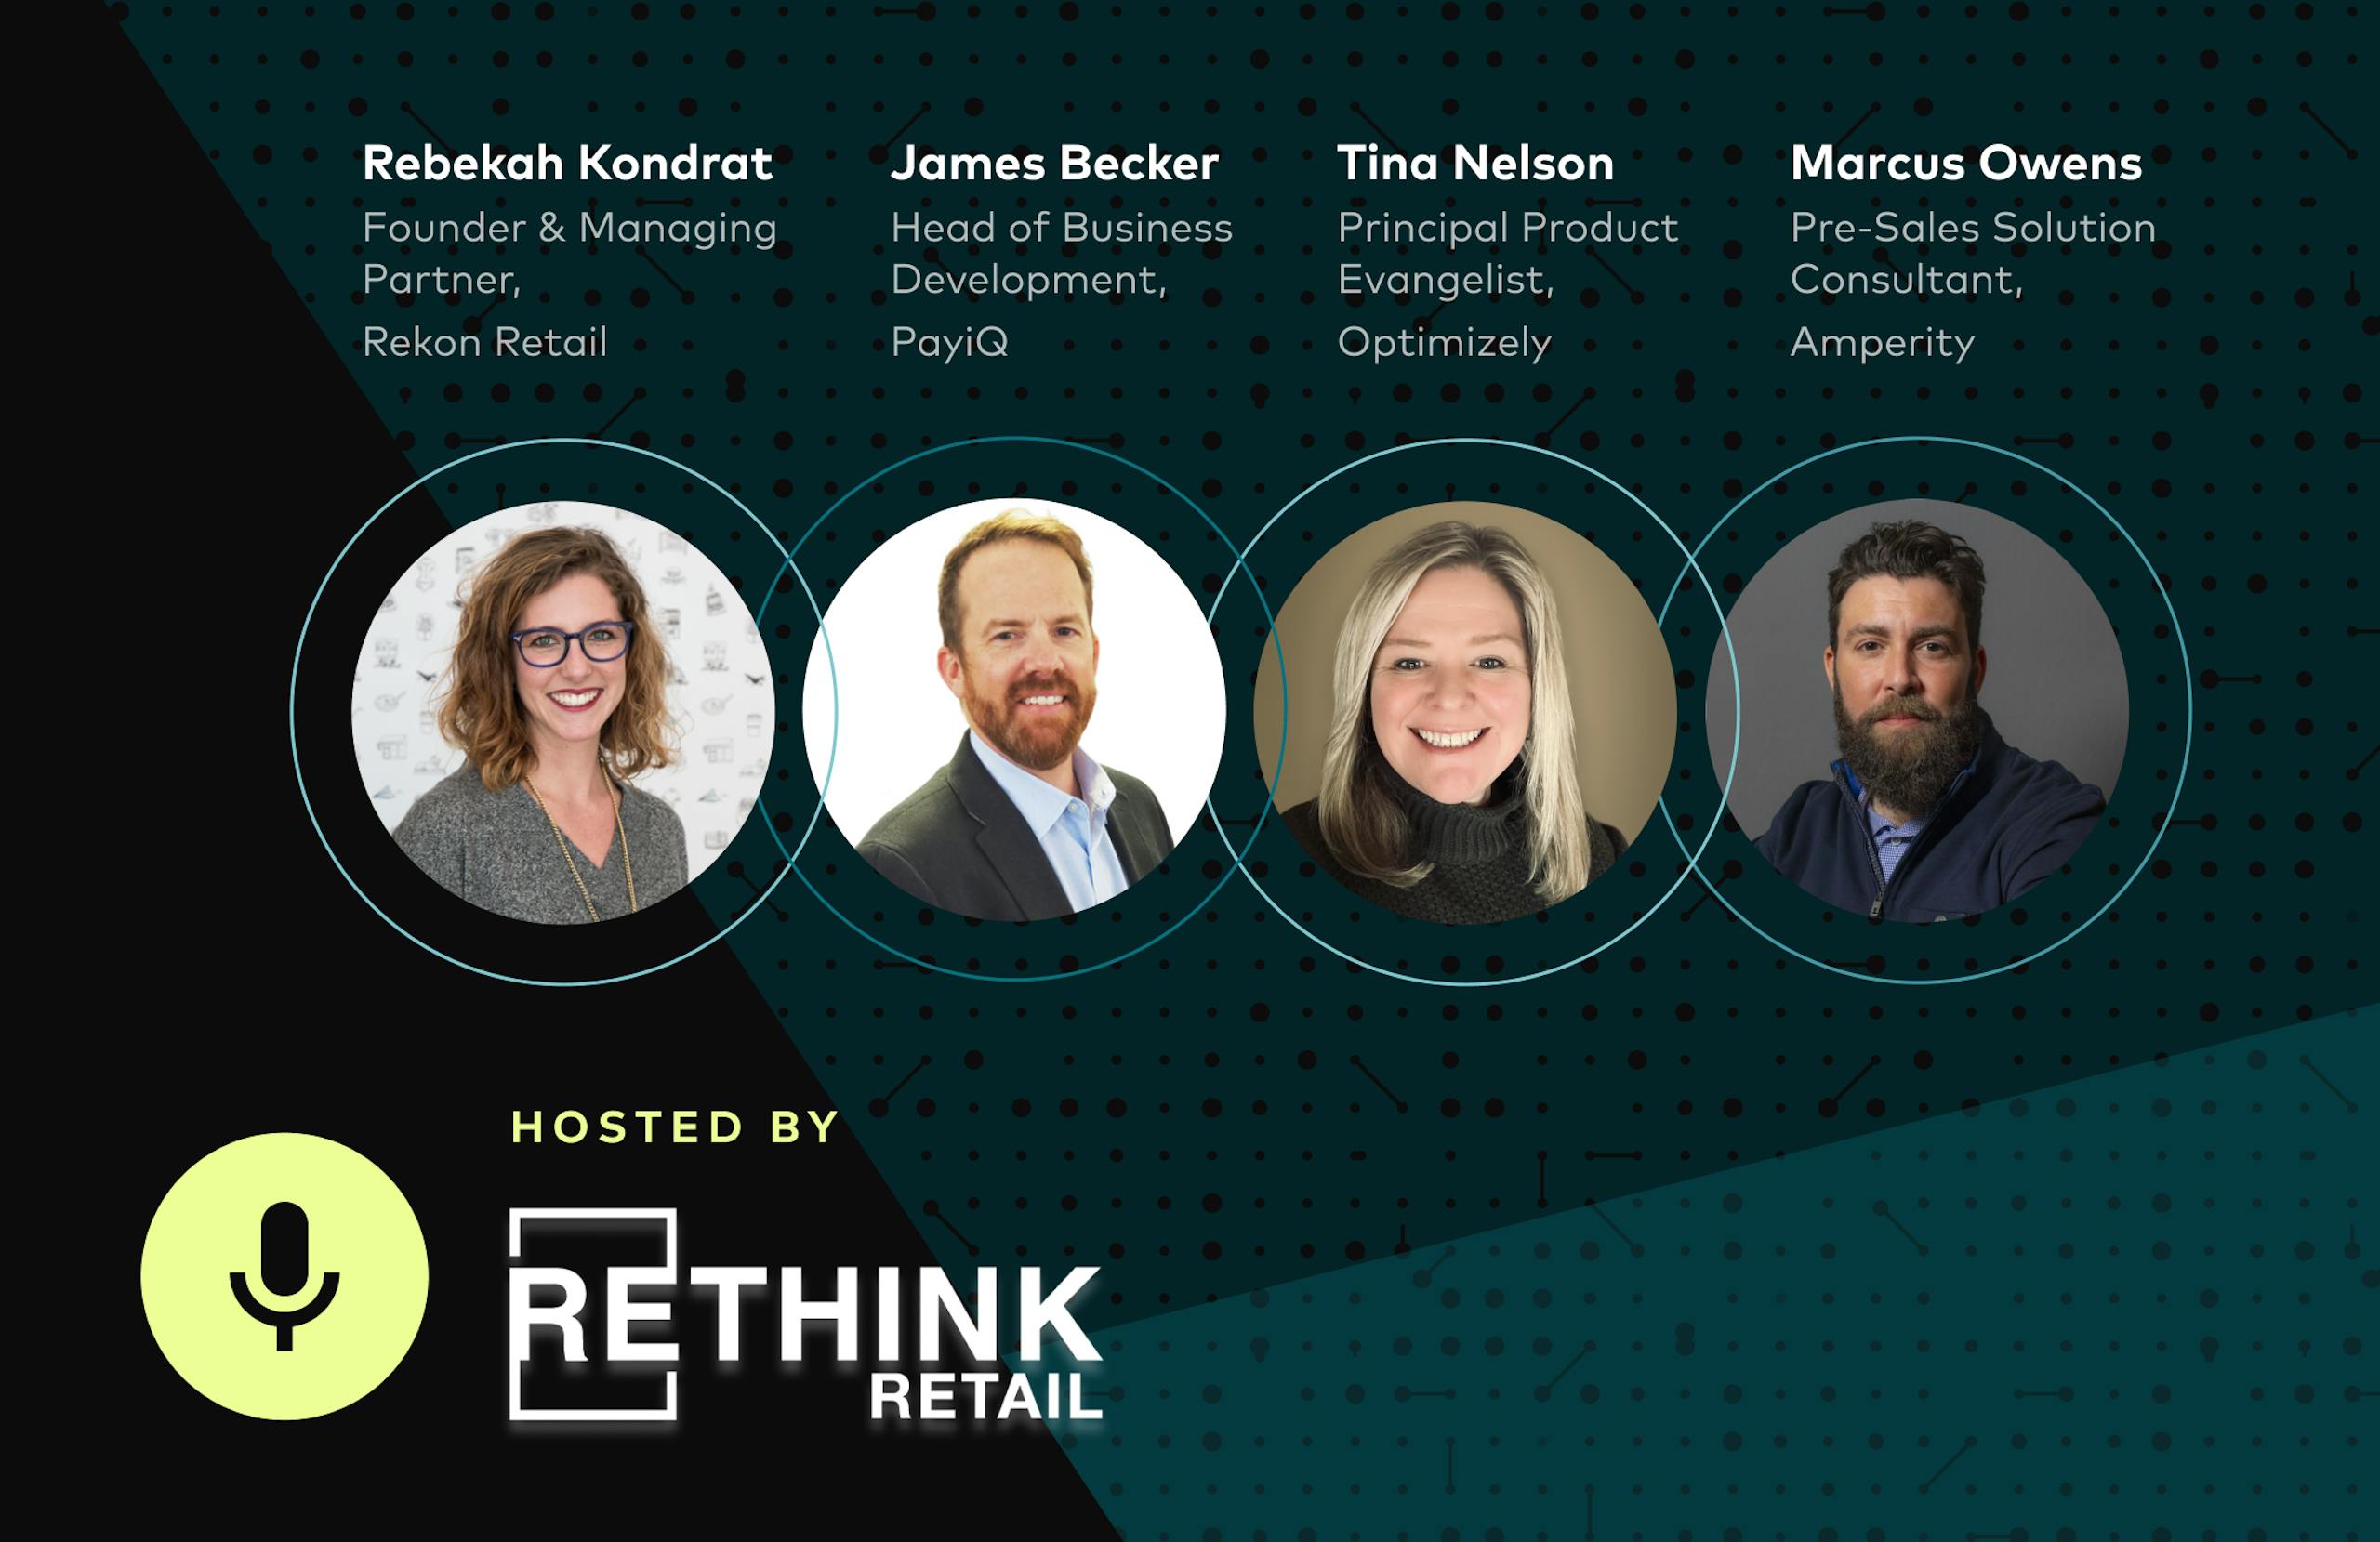 A webinar hosted by Rethink Retail